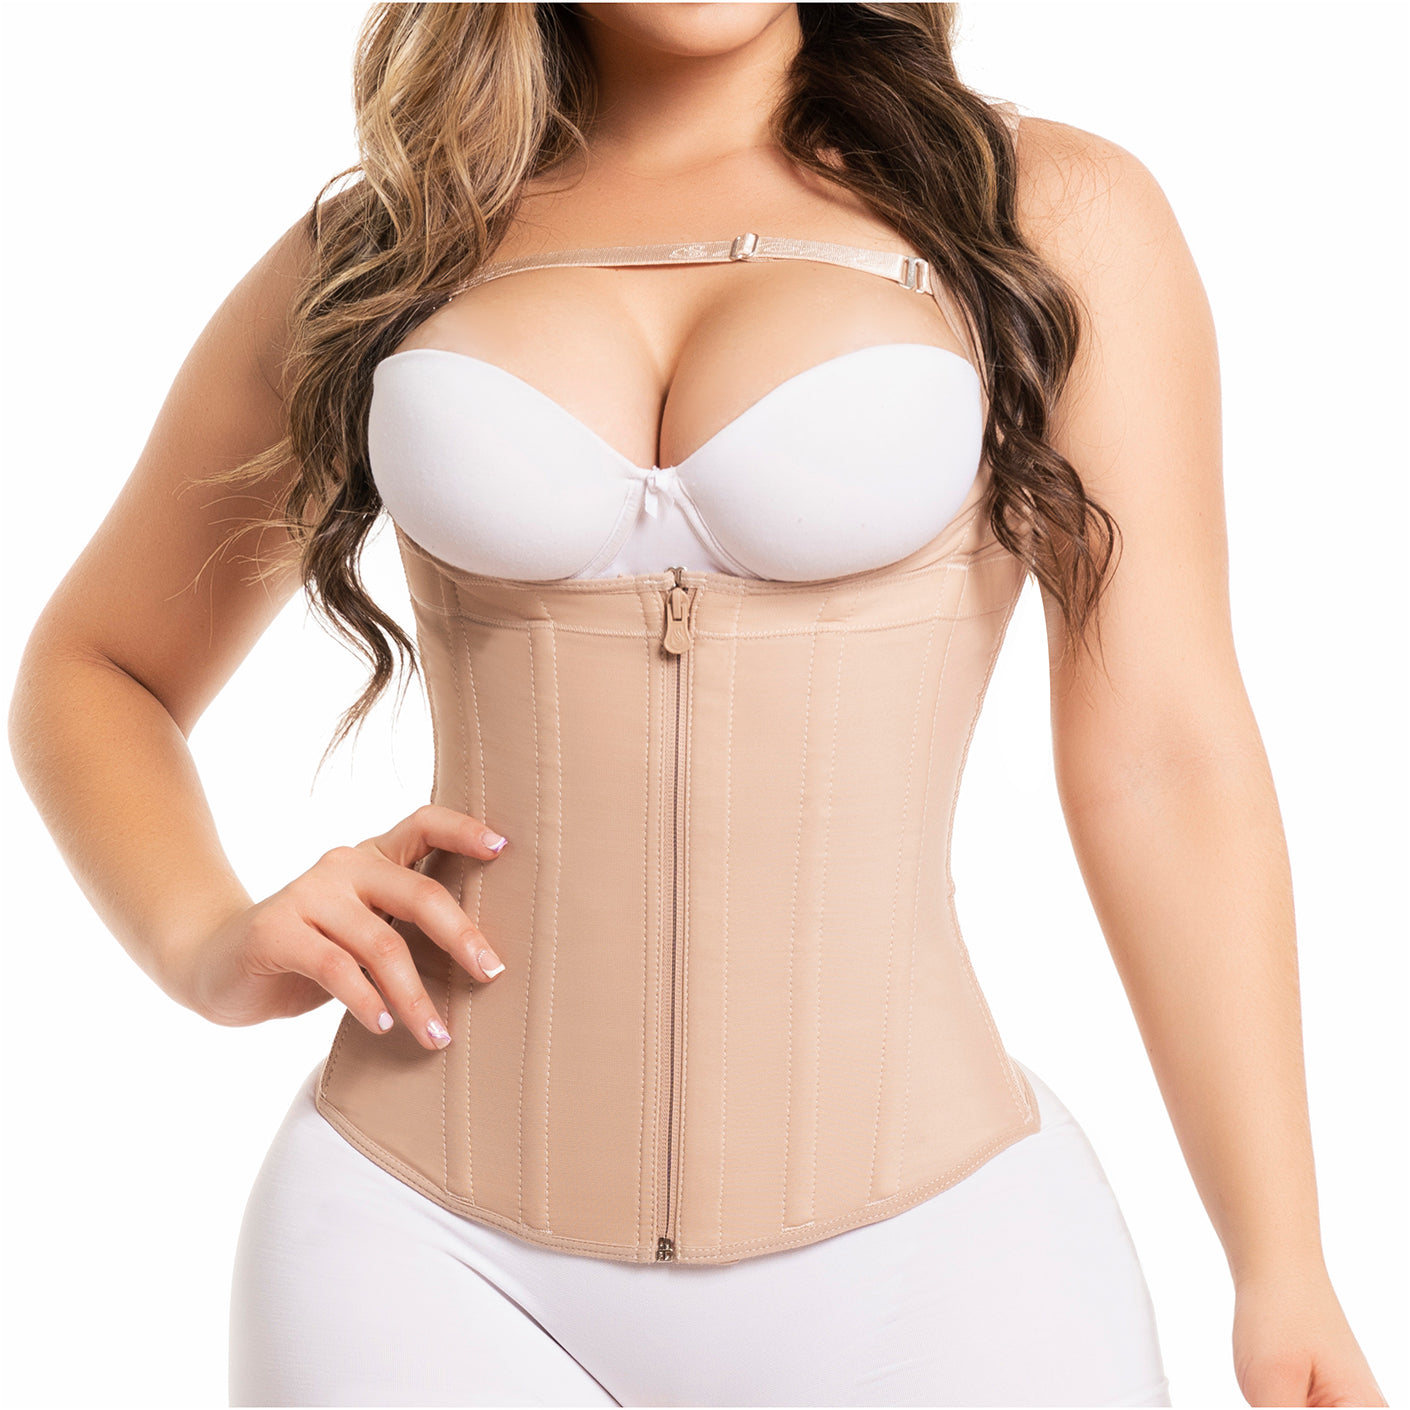 Salome 0309 Post surgical or rest Brassiere - Salome Post Surgical